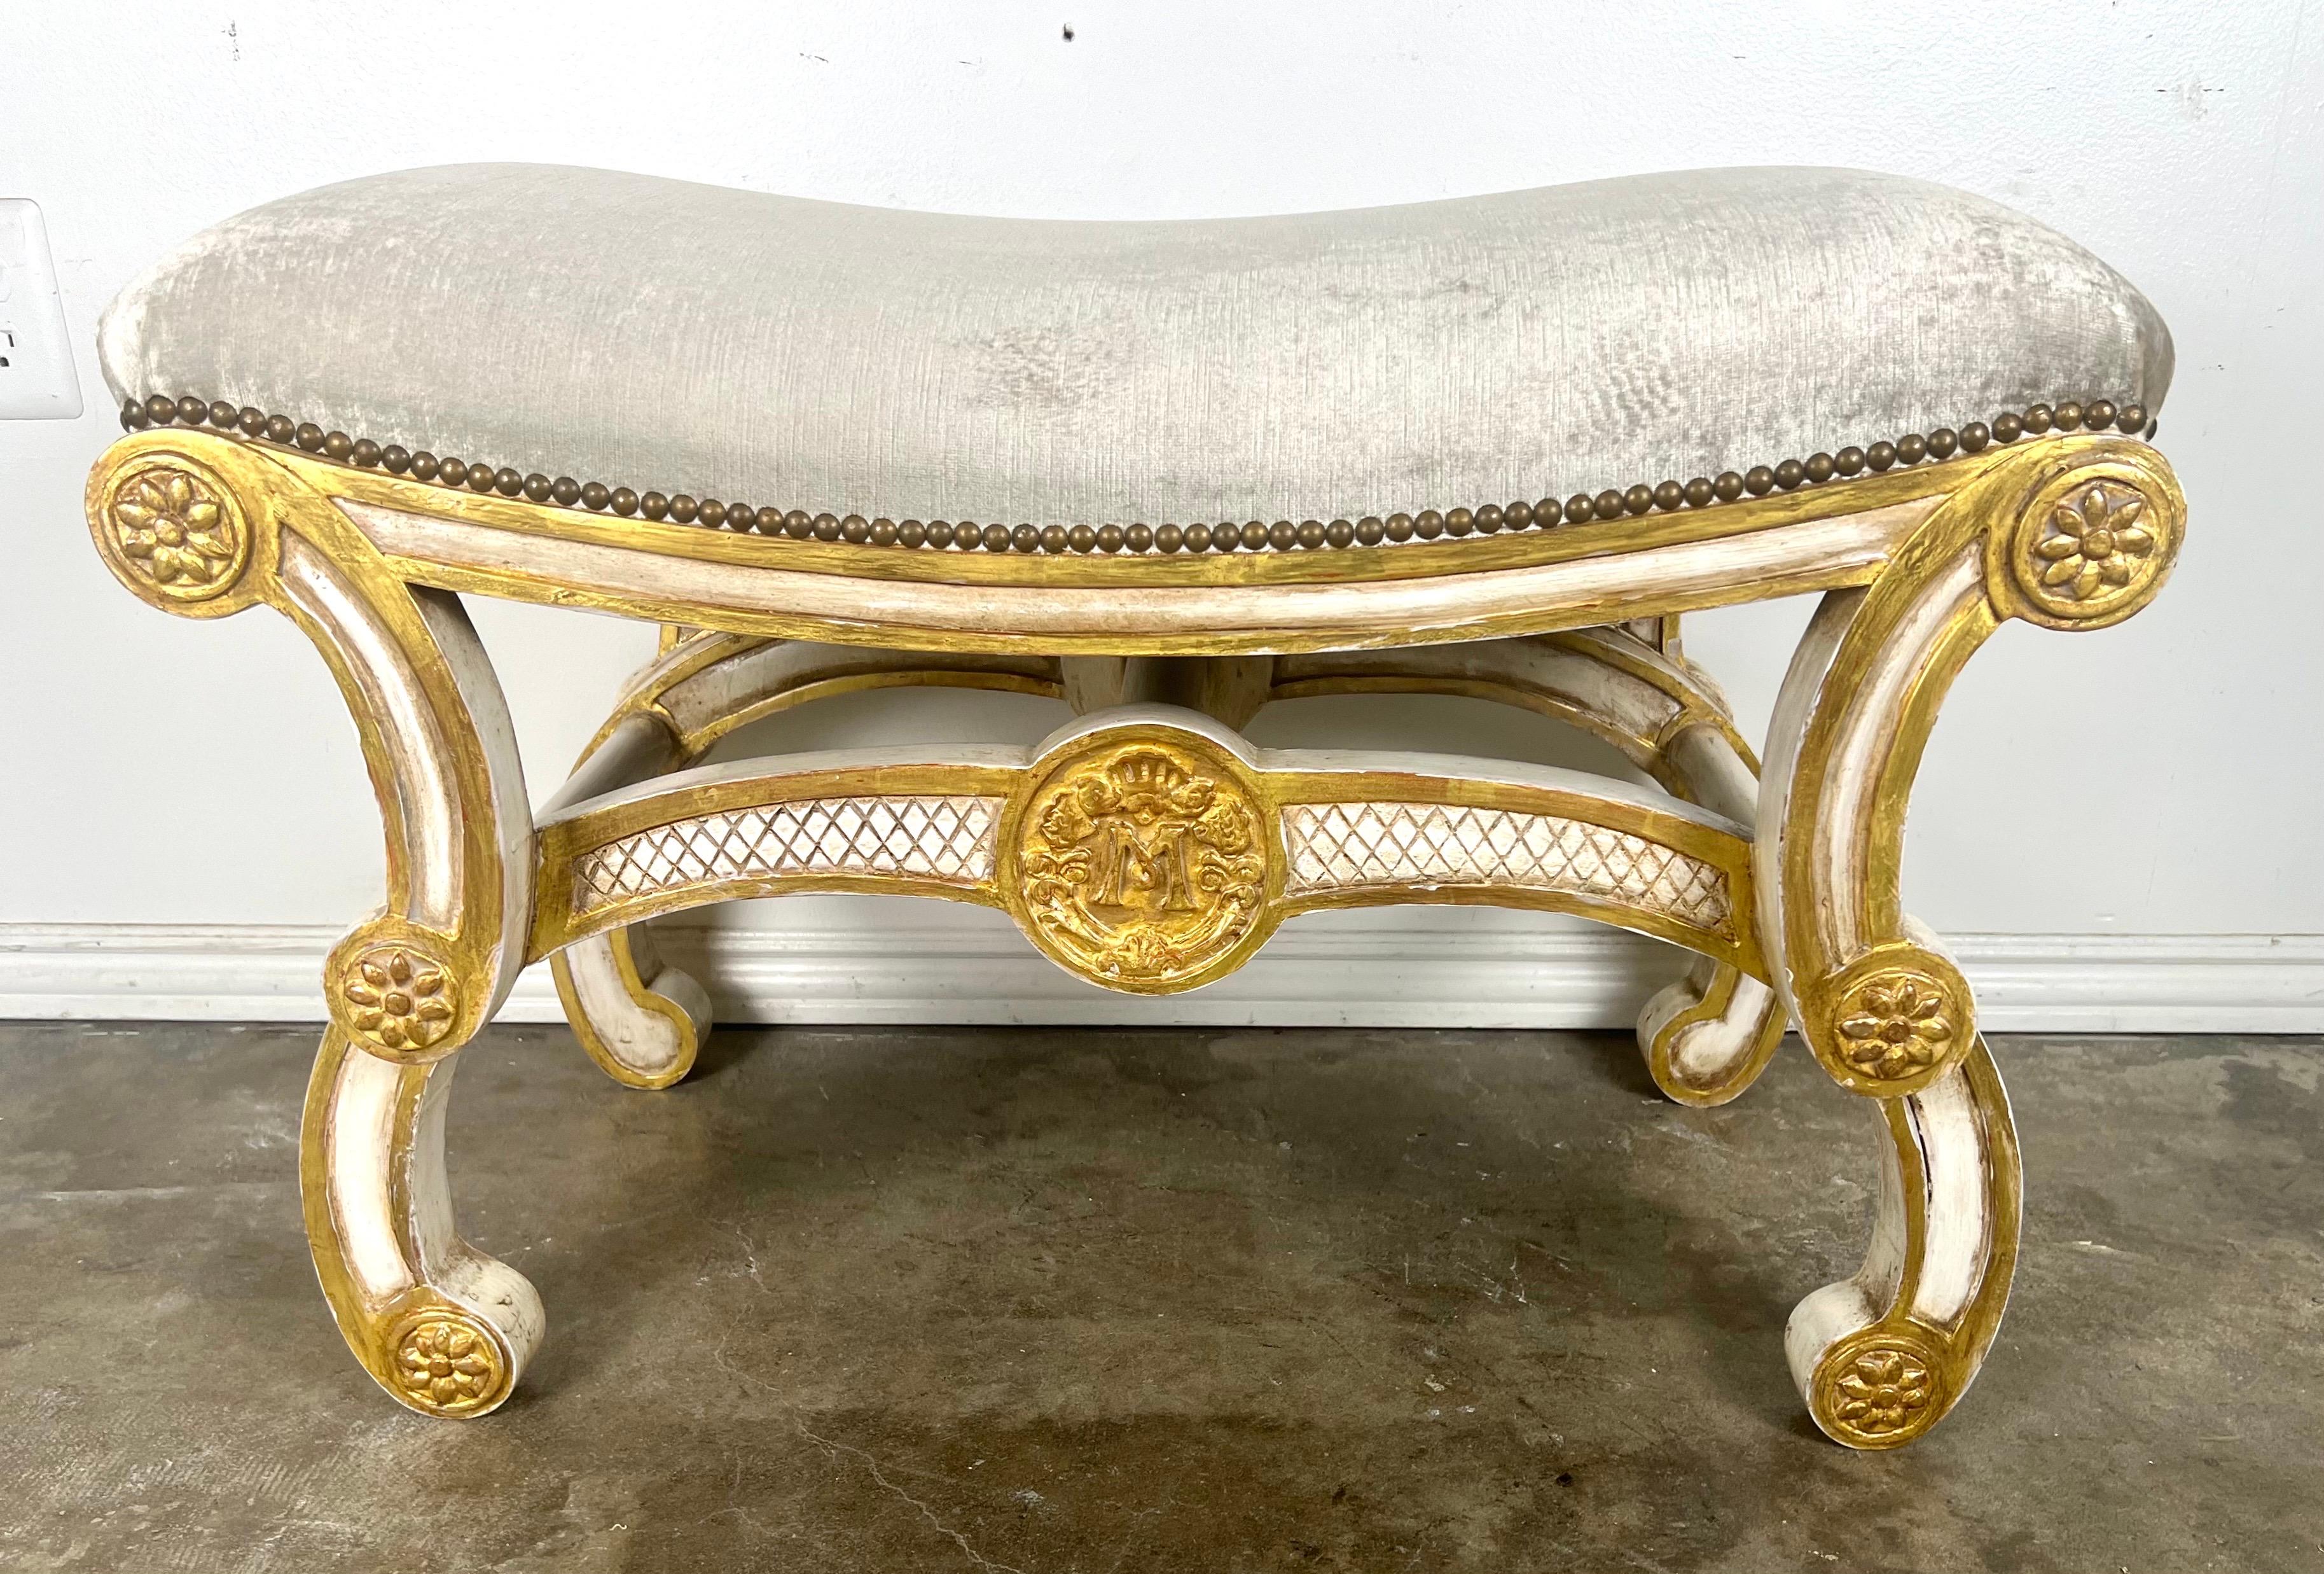 This Rococo Italian style bench beautifully captures the opulent and decorative essence of the Rococo period.  It features painted and parcel gilt embellishments that enhance its elegance and visual appeal.  The scrolled legs are a classic Rococo